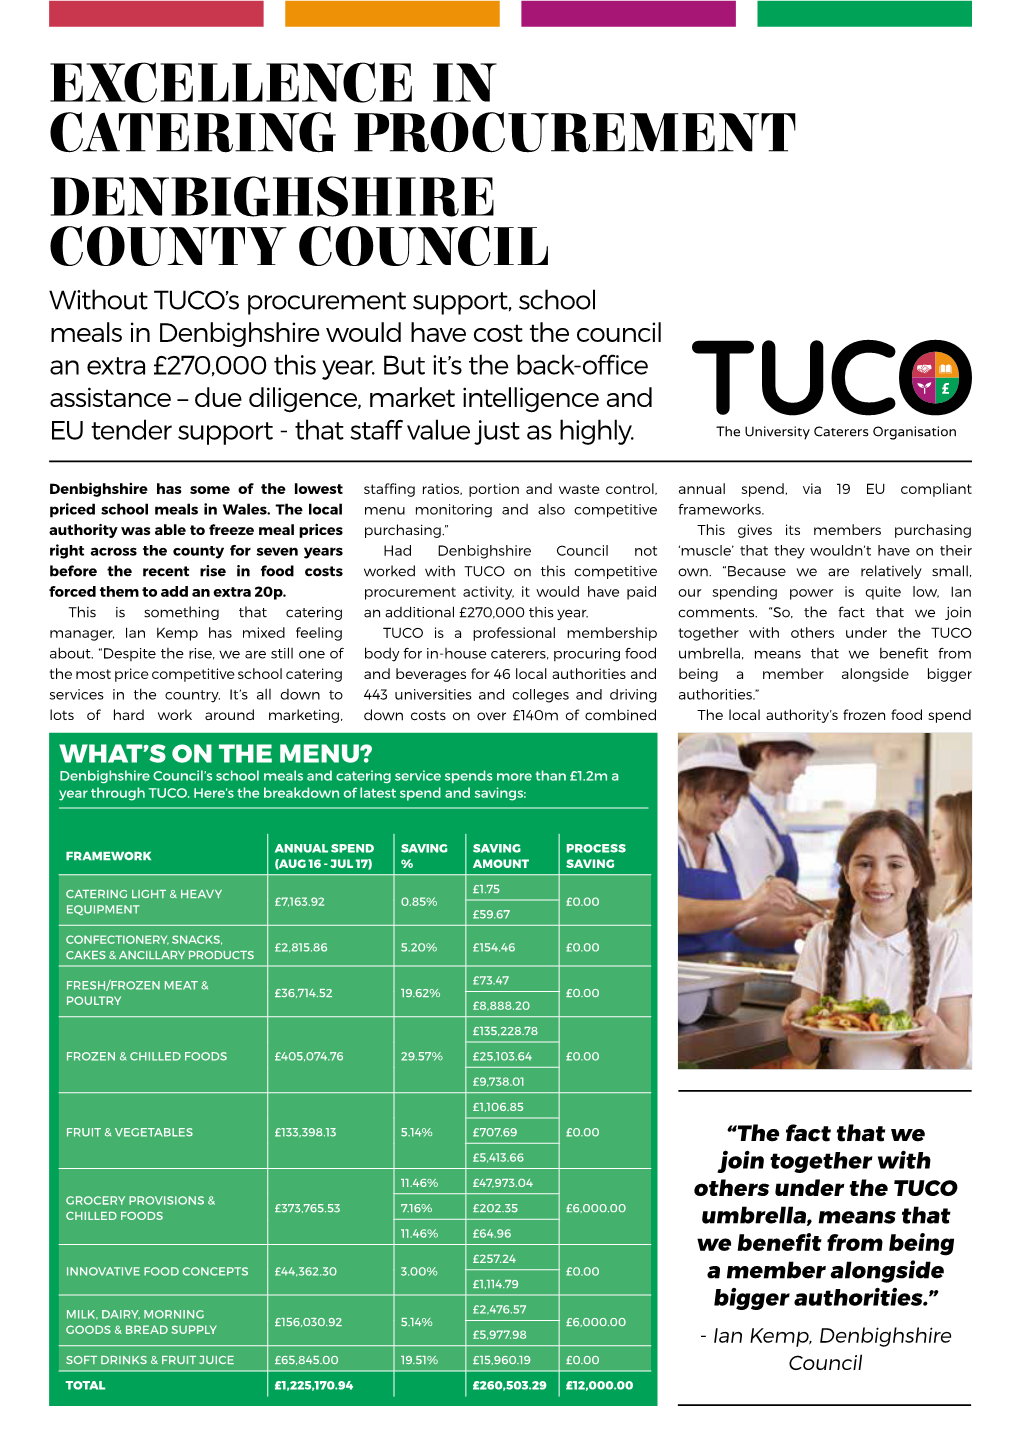 DENBIGHSHIRE COUNTY COUNCIL Without TUCO’S Procurement Support, School Meals in Denbighshire Would Have Cost the Council an Extra £270,000 This Year